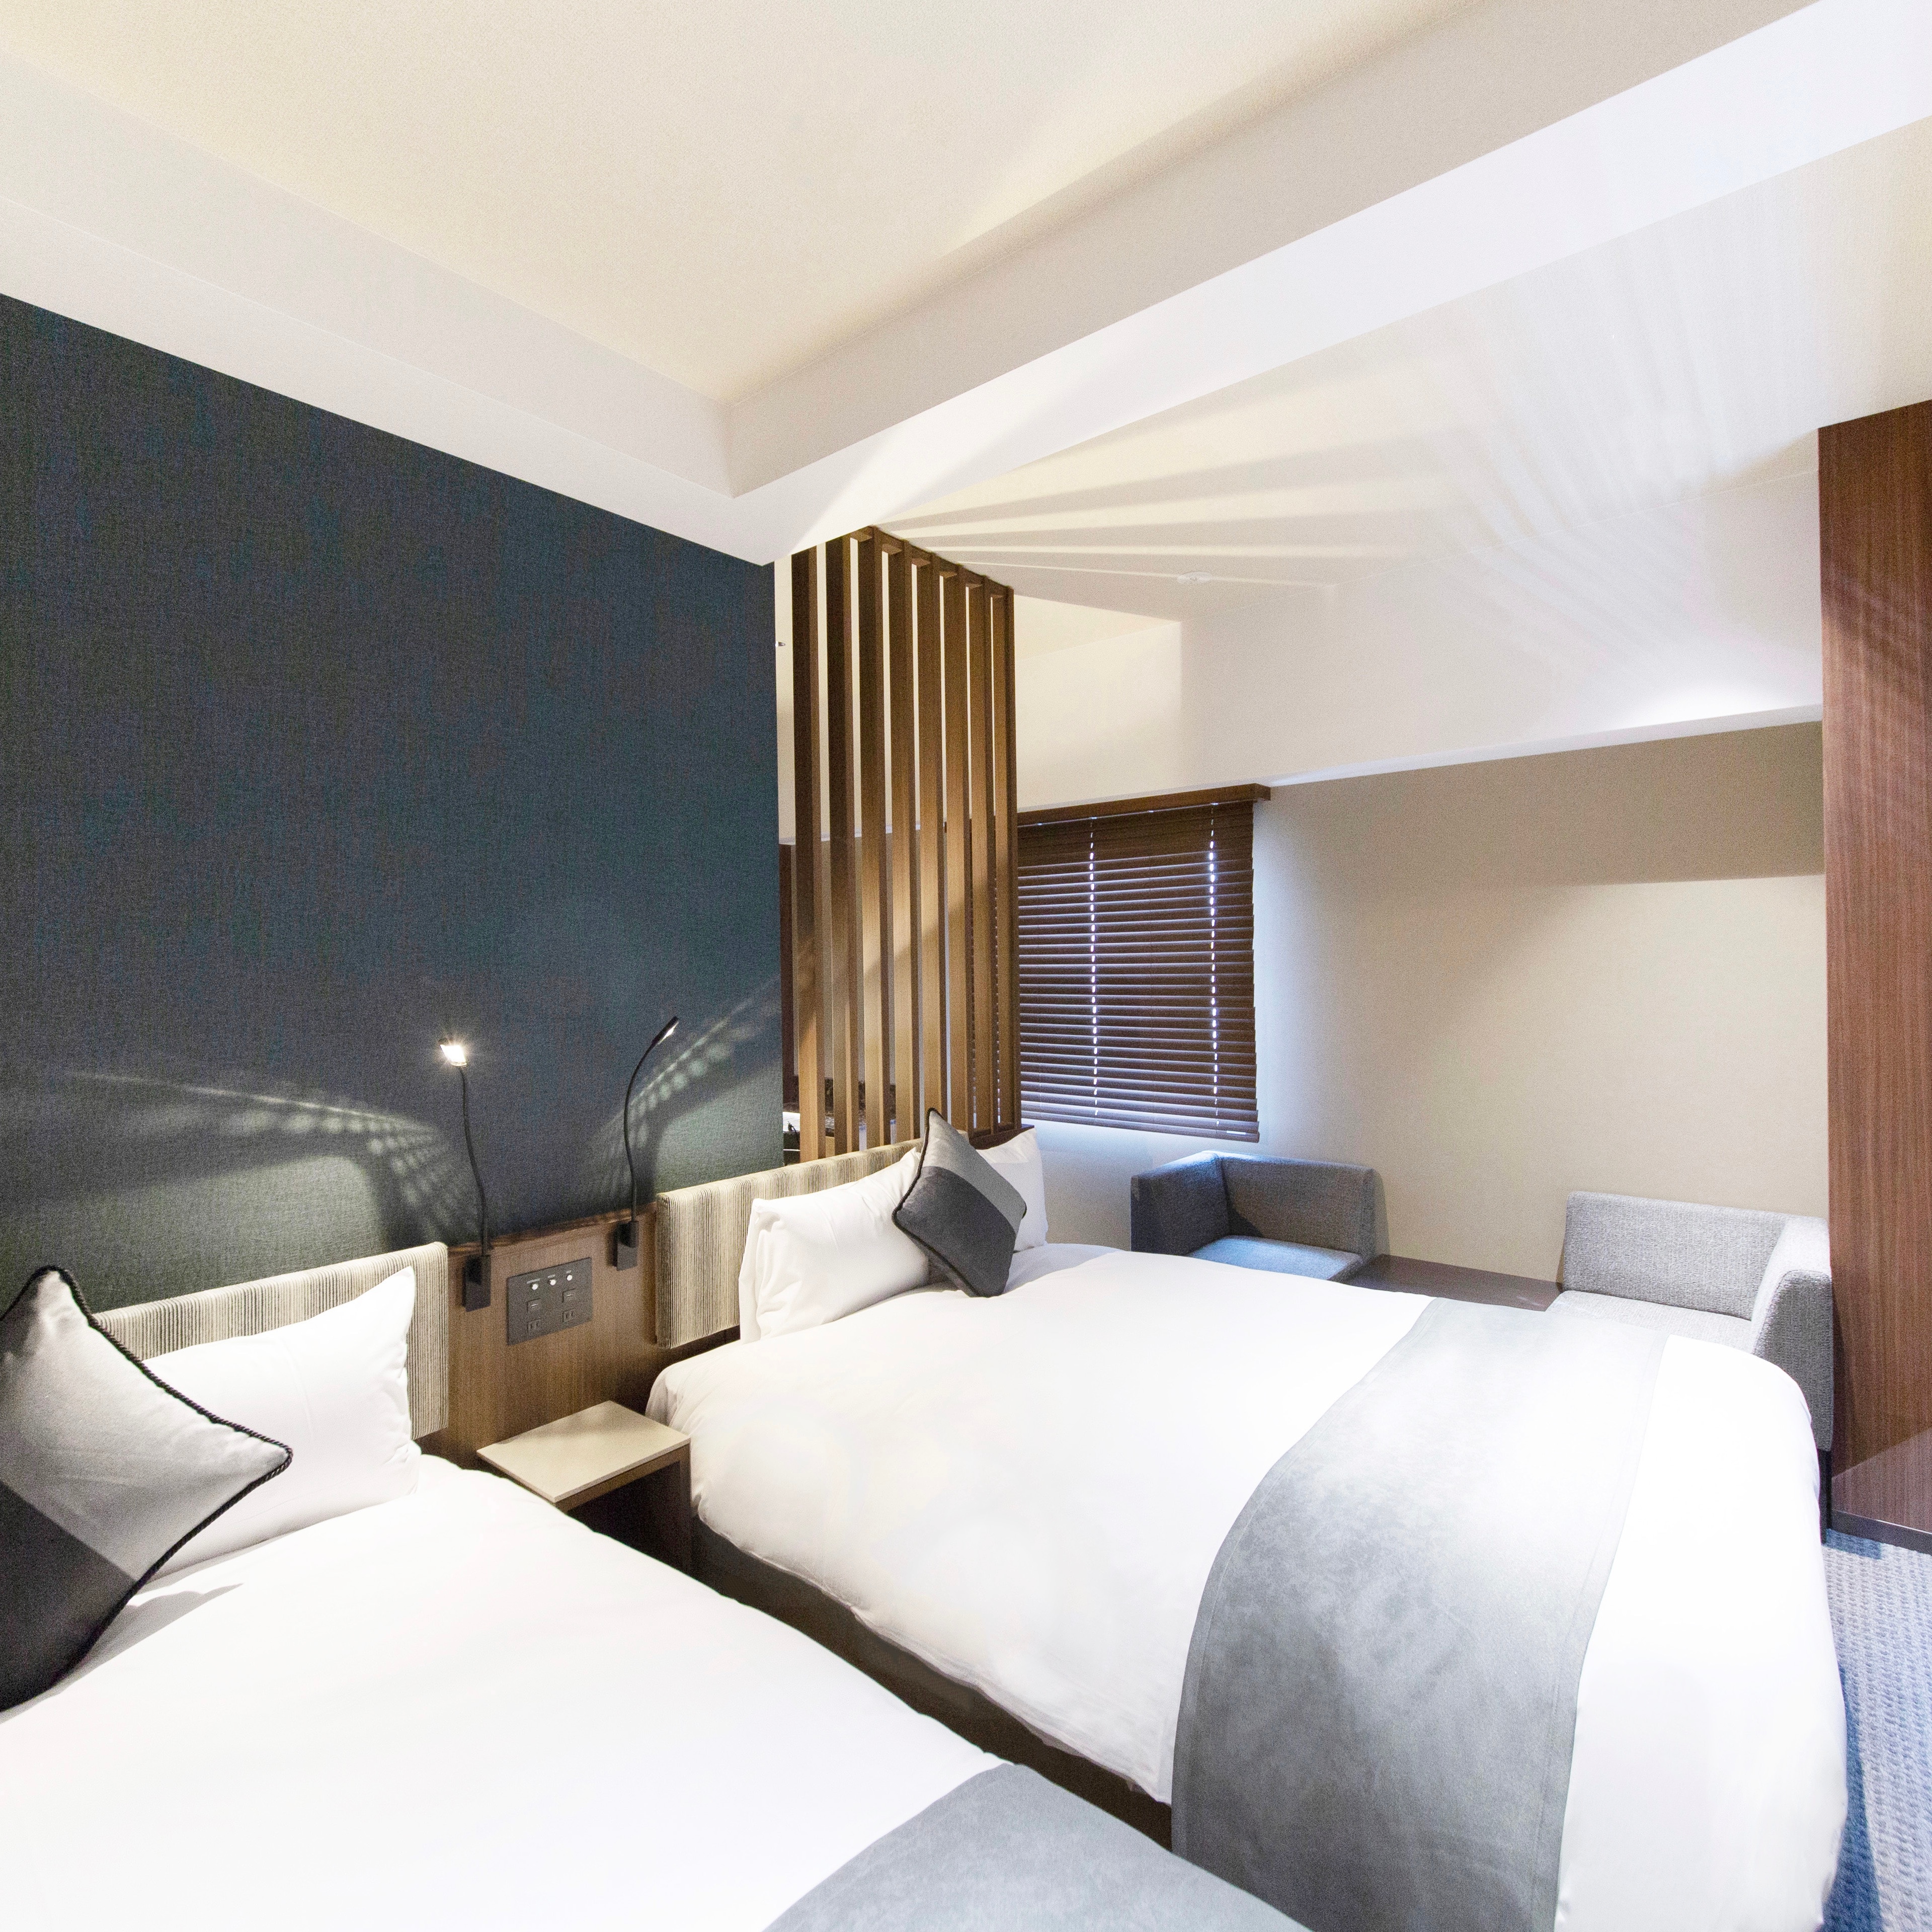 [Guest room] Deluxe twin room Bed is spacious and large 140 cm size ♪ Please take a rest ♪